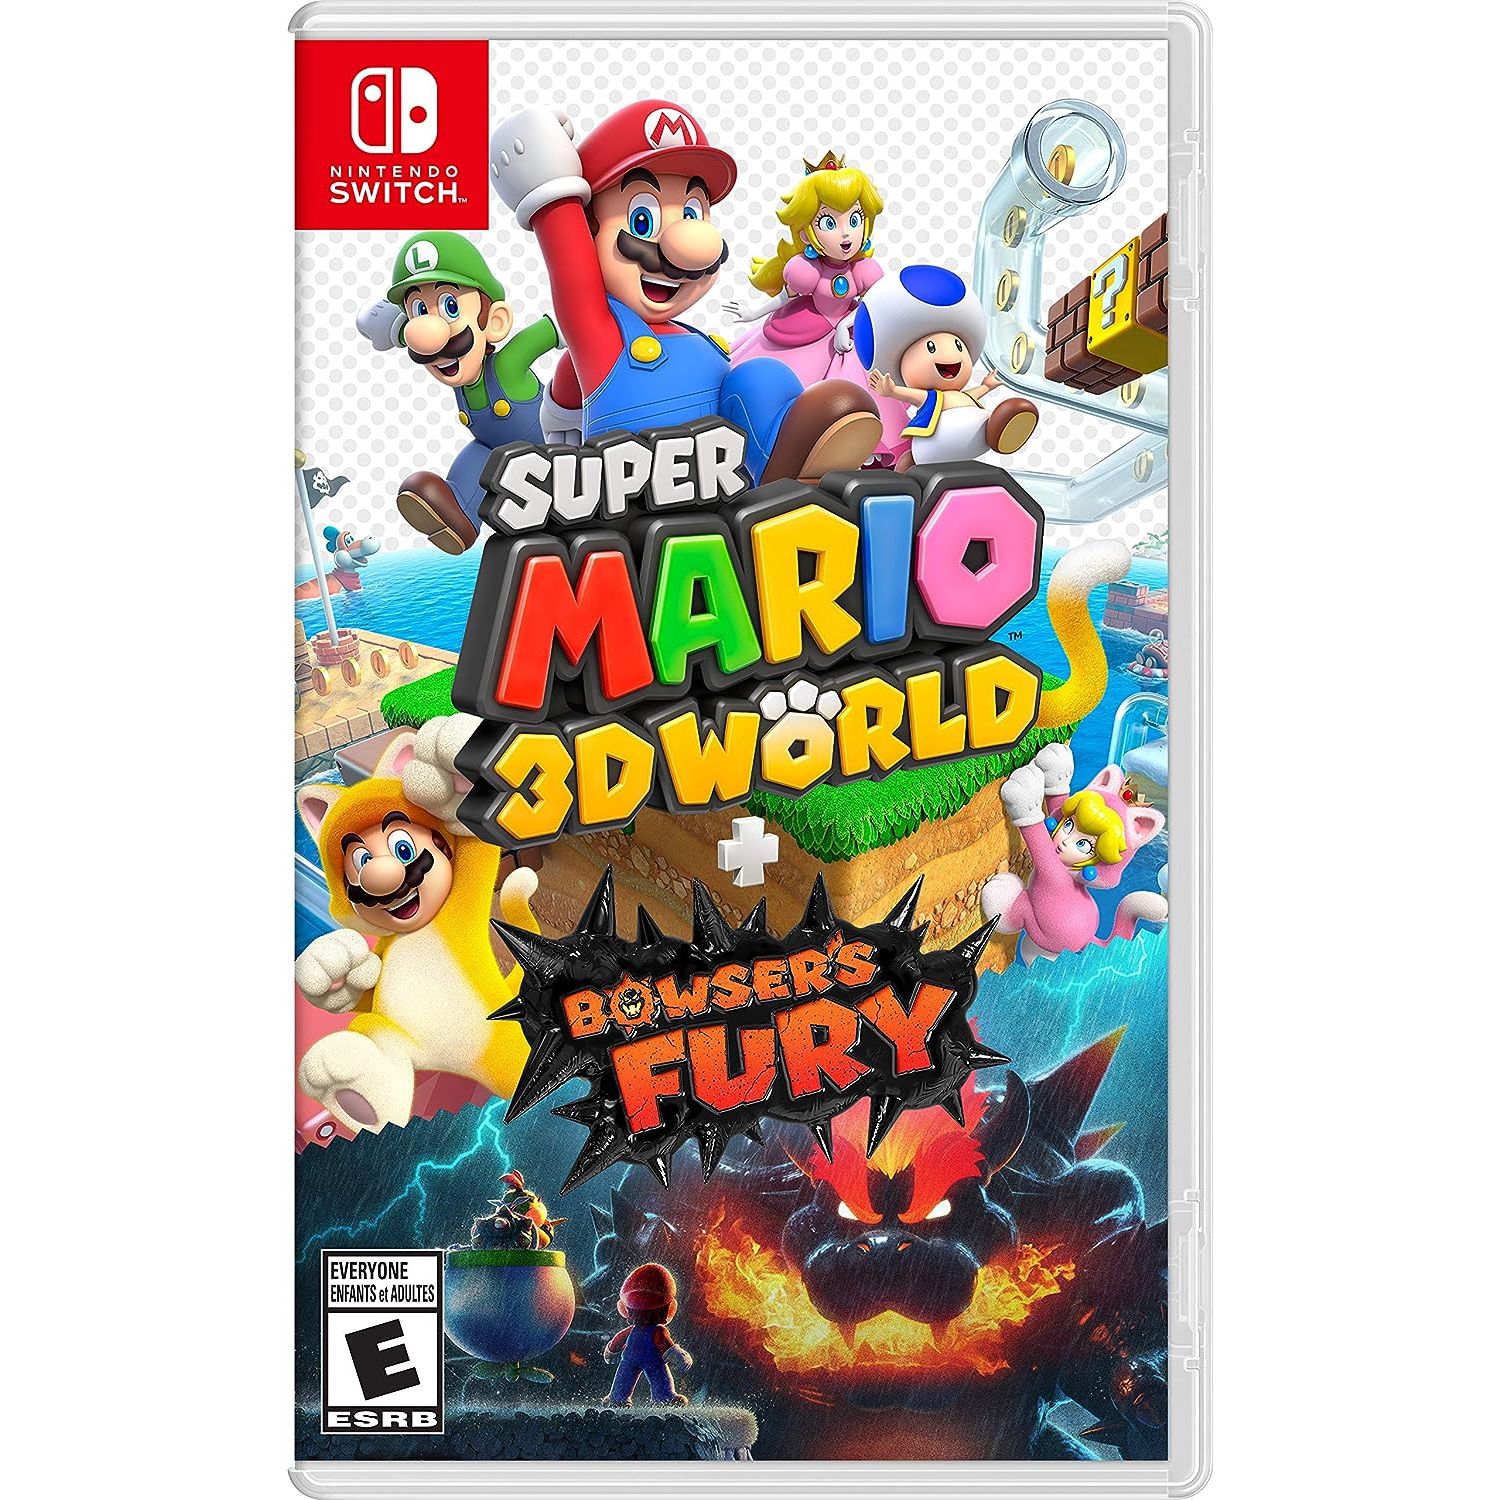 Super Mario 3D World + Bowsers Fury - Standard Edition